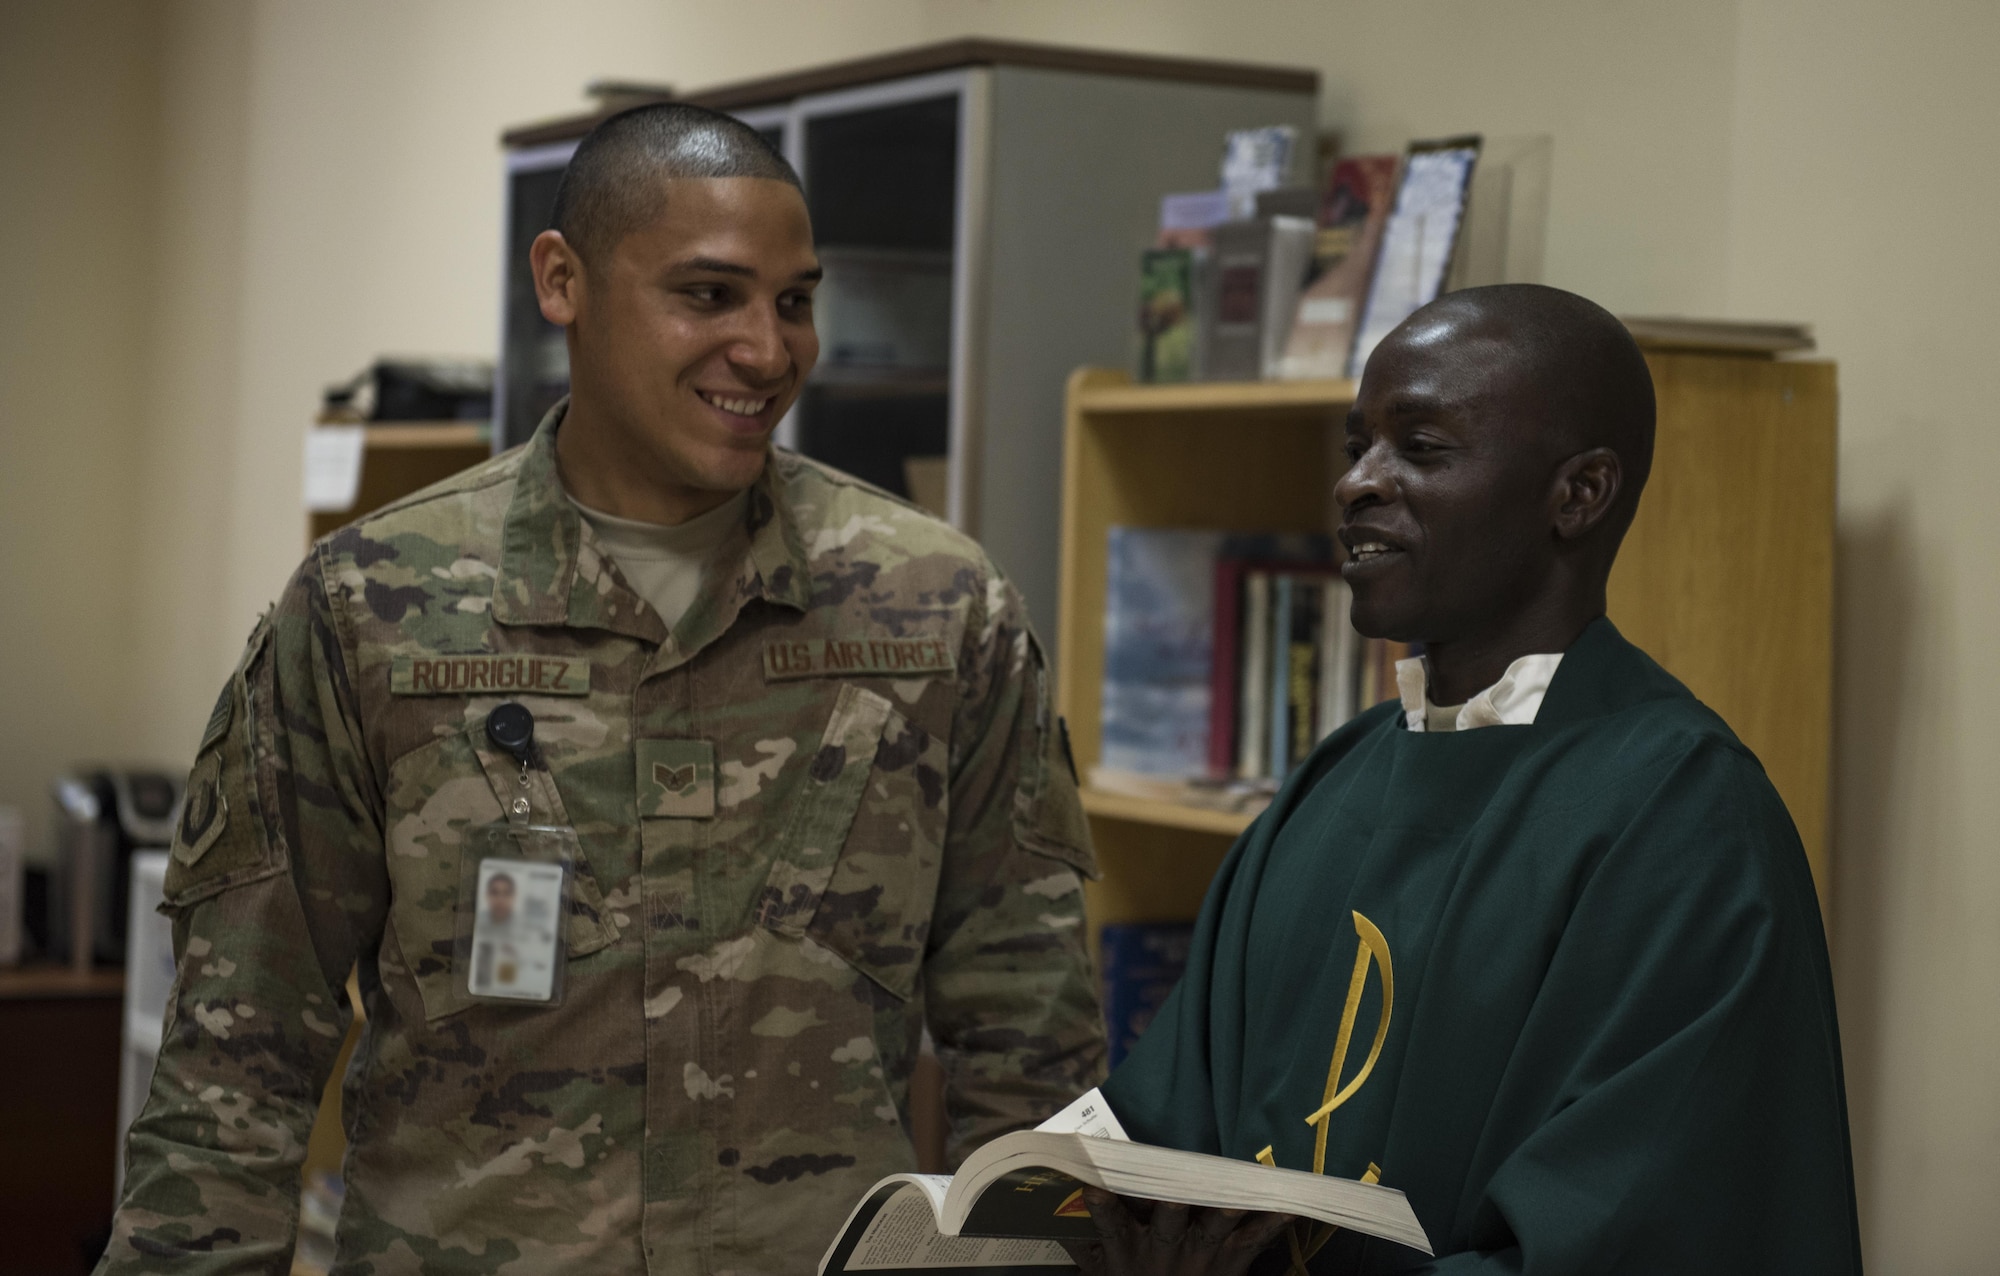 Staff Sgt. Christopher Rodriguez, 455th Air Expeditionary Wing chaplain assistant, and Chaplain (Capt.) John Appiah, 455th AEW, discuss a religious service at Hamid Karzai International Airport, Kabul, Afghanistan, July 23, 2017. Religious support teams provide spiritual support to all members and find ways to meet the needs of individuals who do not have the resources to practice their faith in a deployed location. (U.S. Air Force photo by Staff Sgt. Benjamin Gonsier)